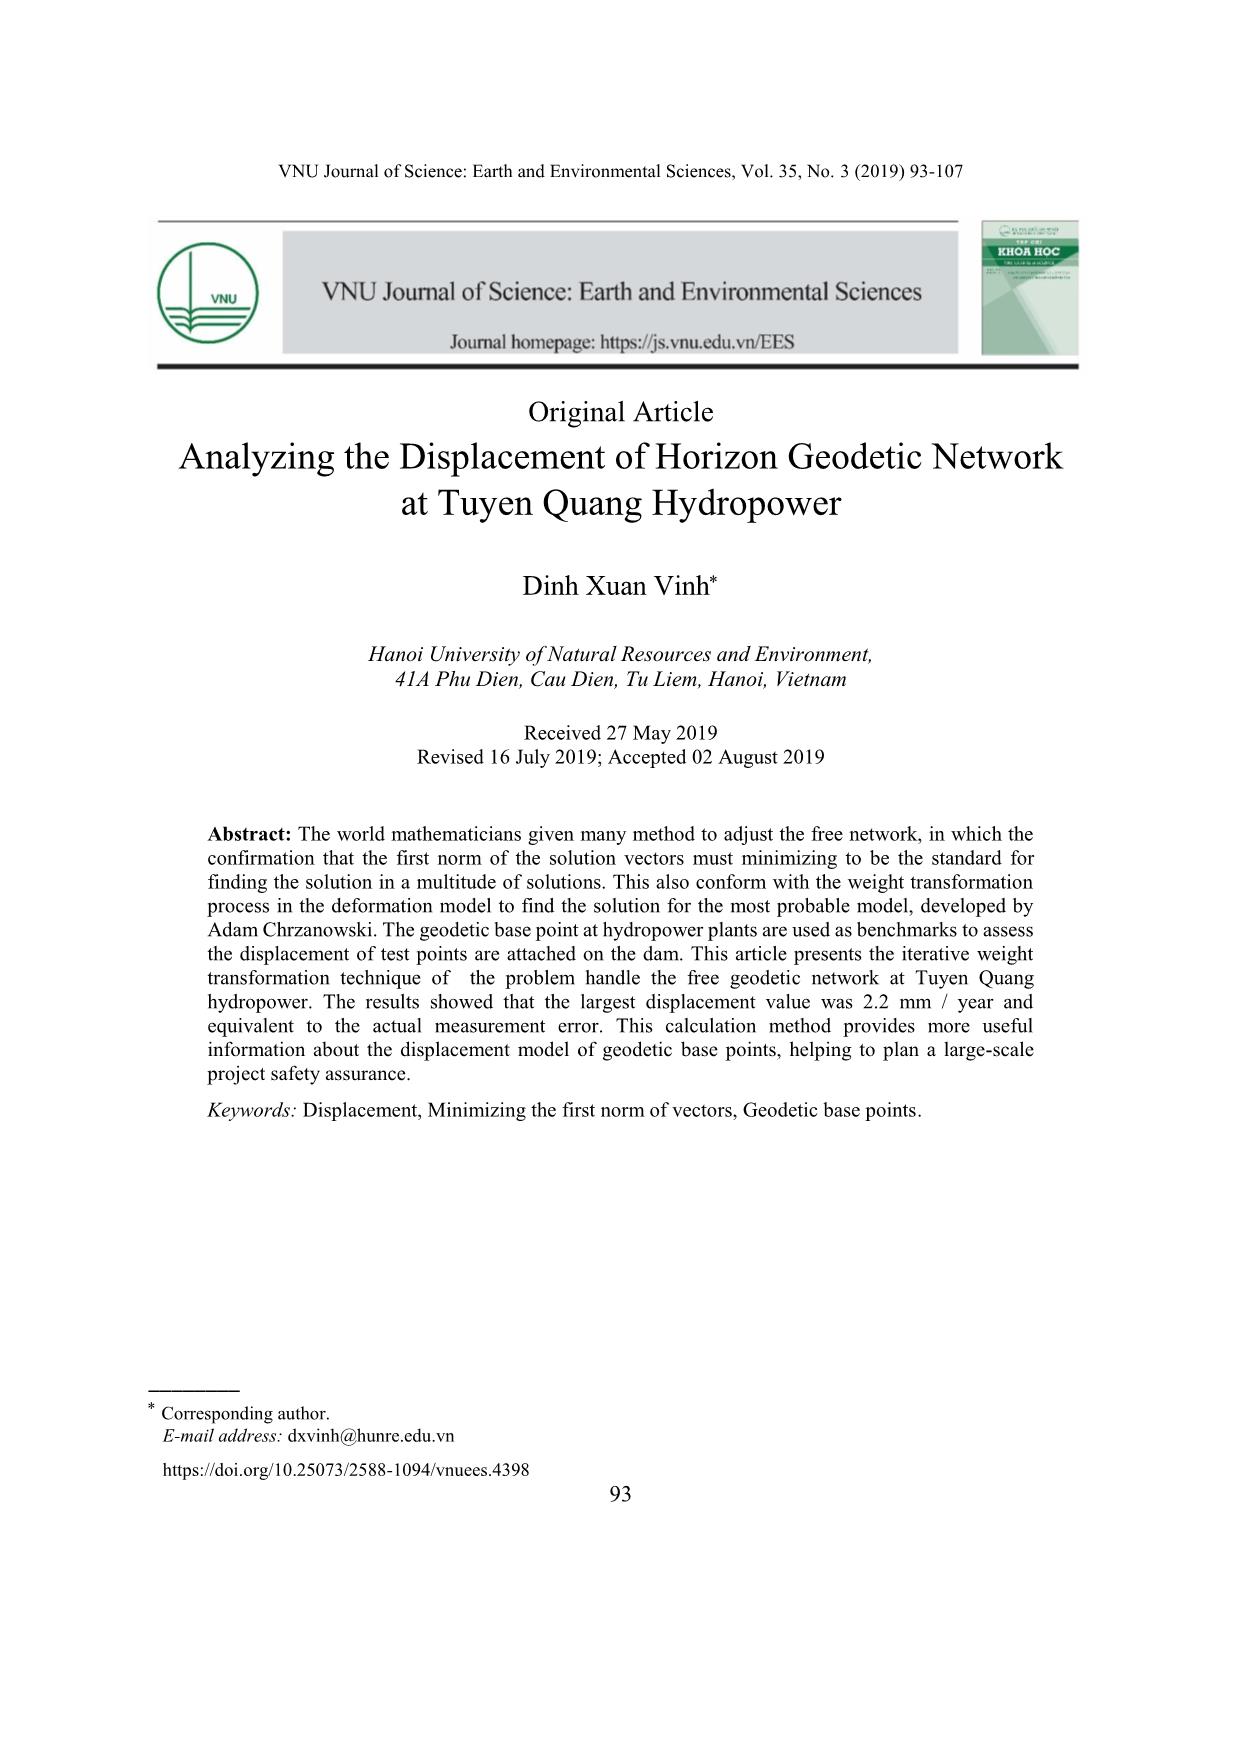 Analyzing the Displacement of Horizon Geodetic Network at Tuyen Quang Hydropower trang 1